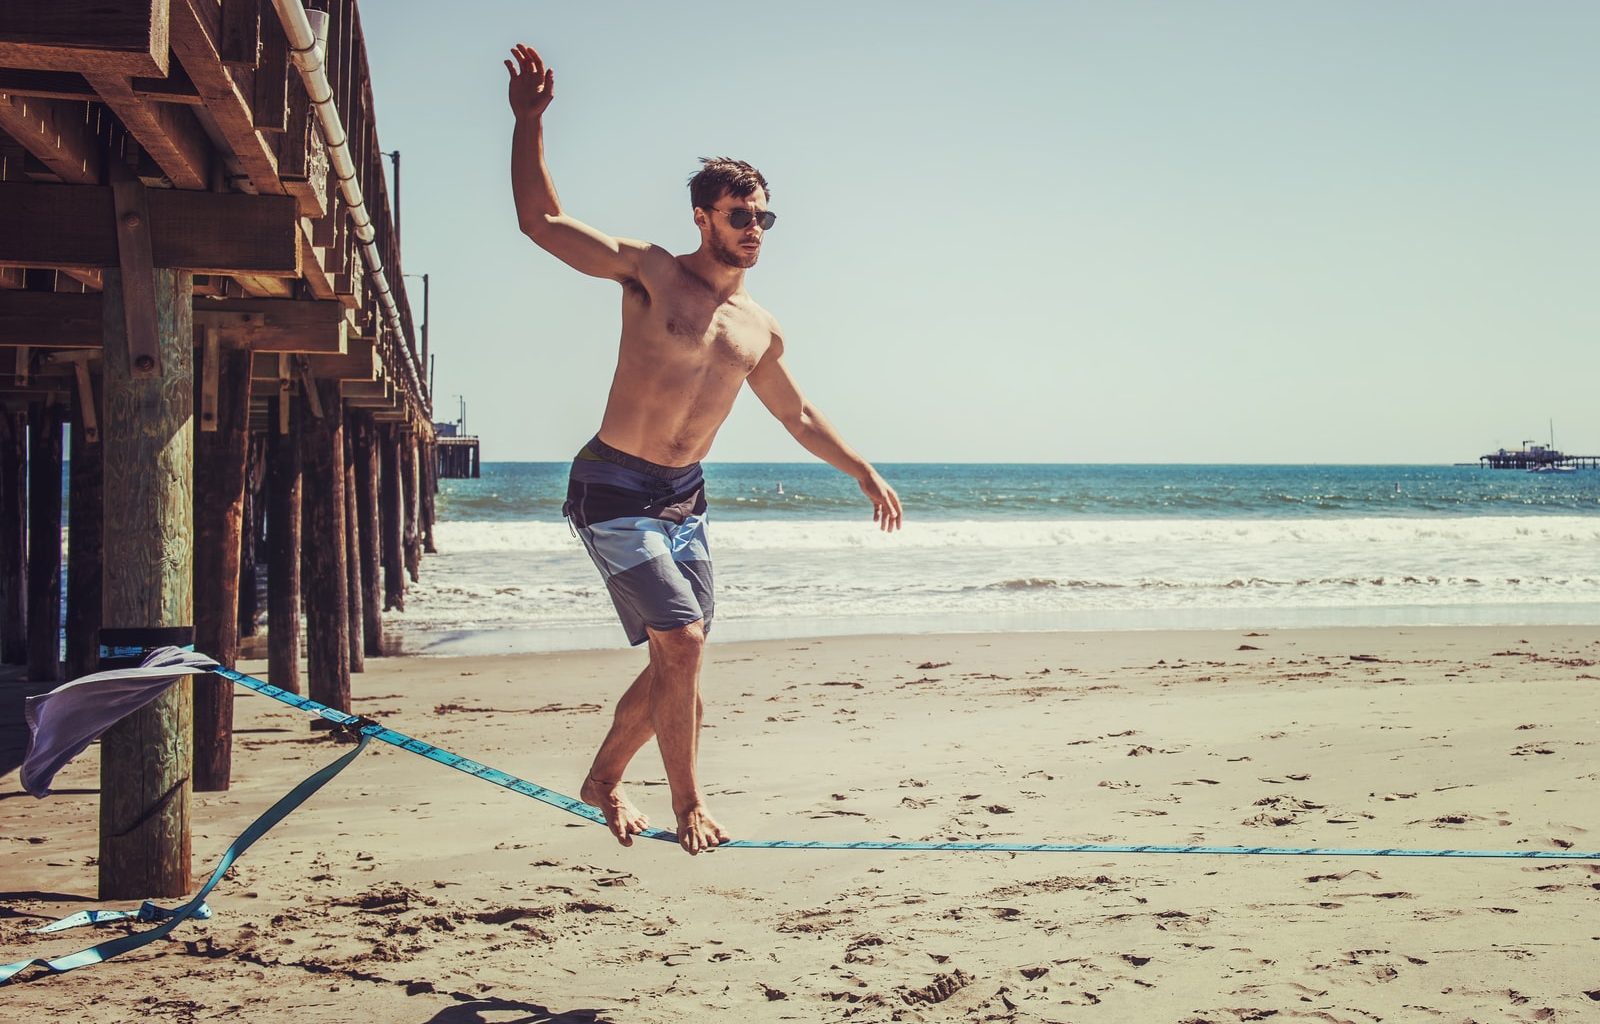 man wearing sunglasses and board shorts standing on rope